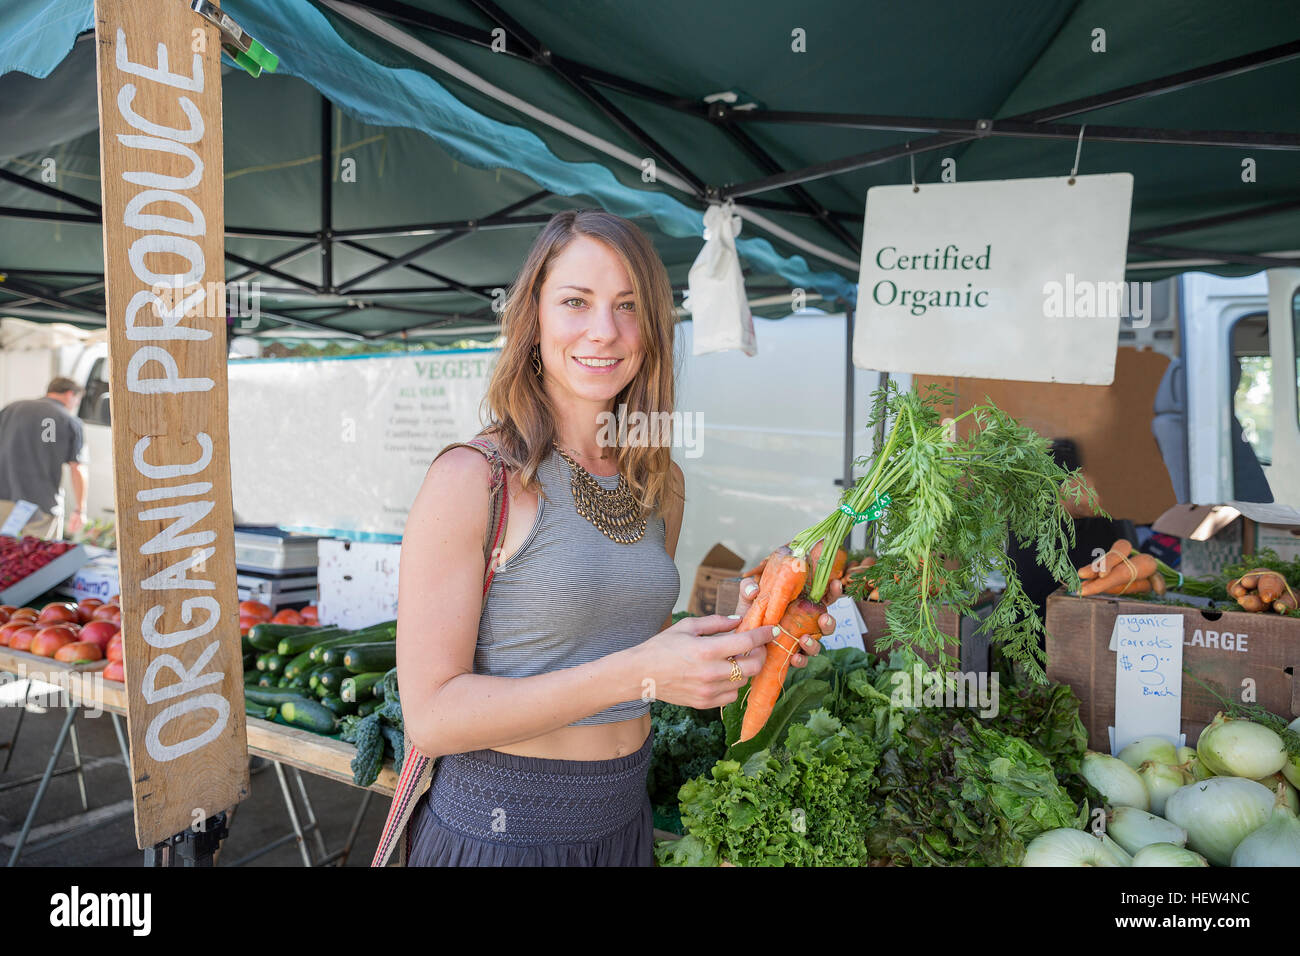 Woman at fruit and vegetable stall holding carrots Stock Photo